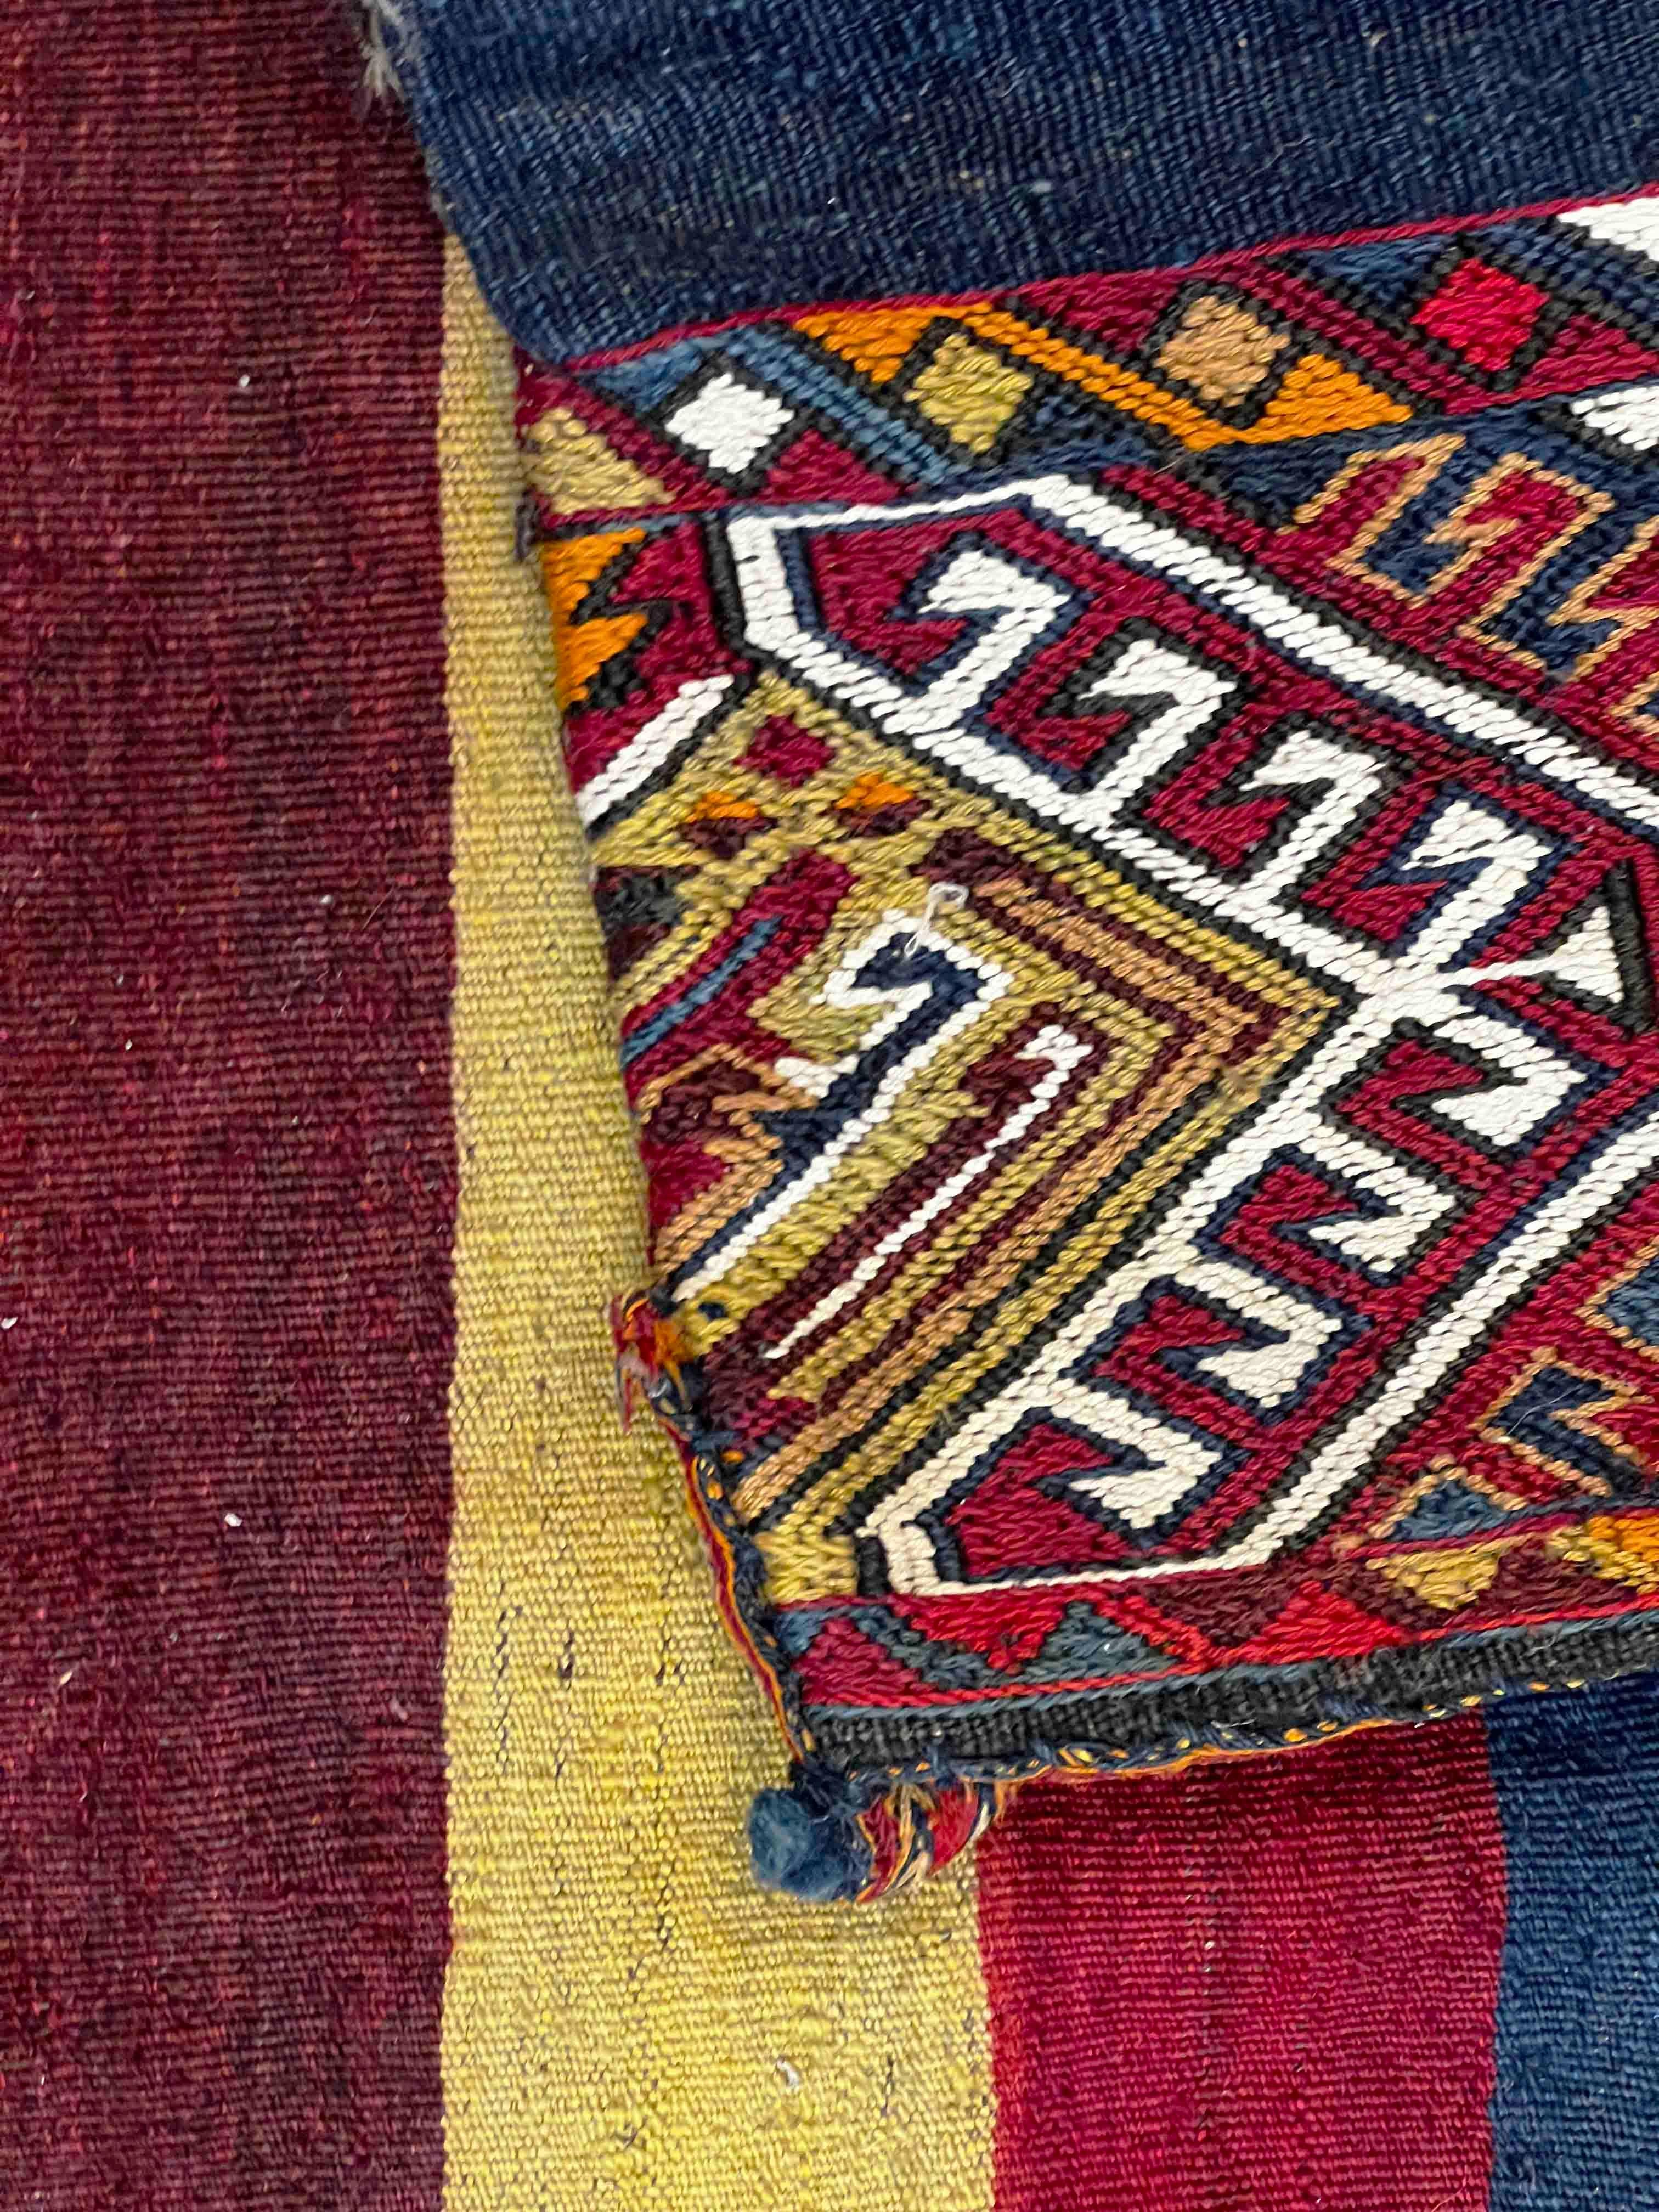 A stone's throw from the Eiffel Tower We are a family business specializing in the purchase, sale and
expertise of old, modern and contemporary tapestries, rugs, kilims and textiles.
We work for private clients, amateurs, antique dealers, also